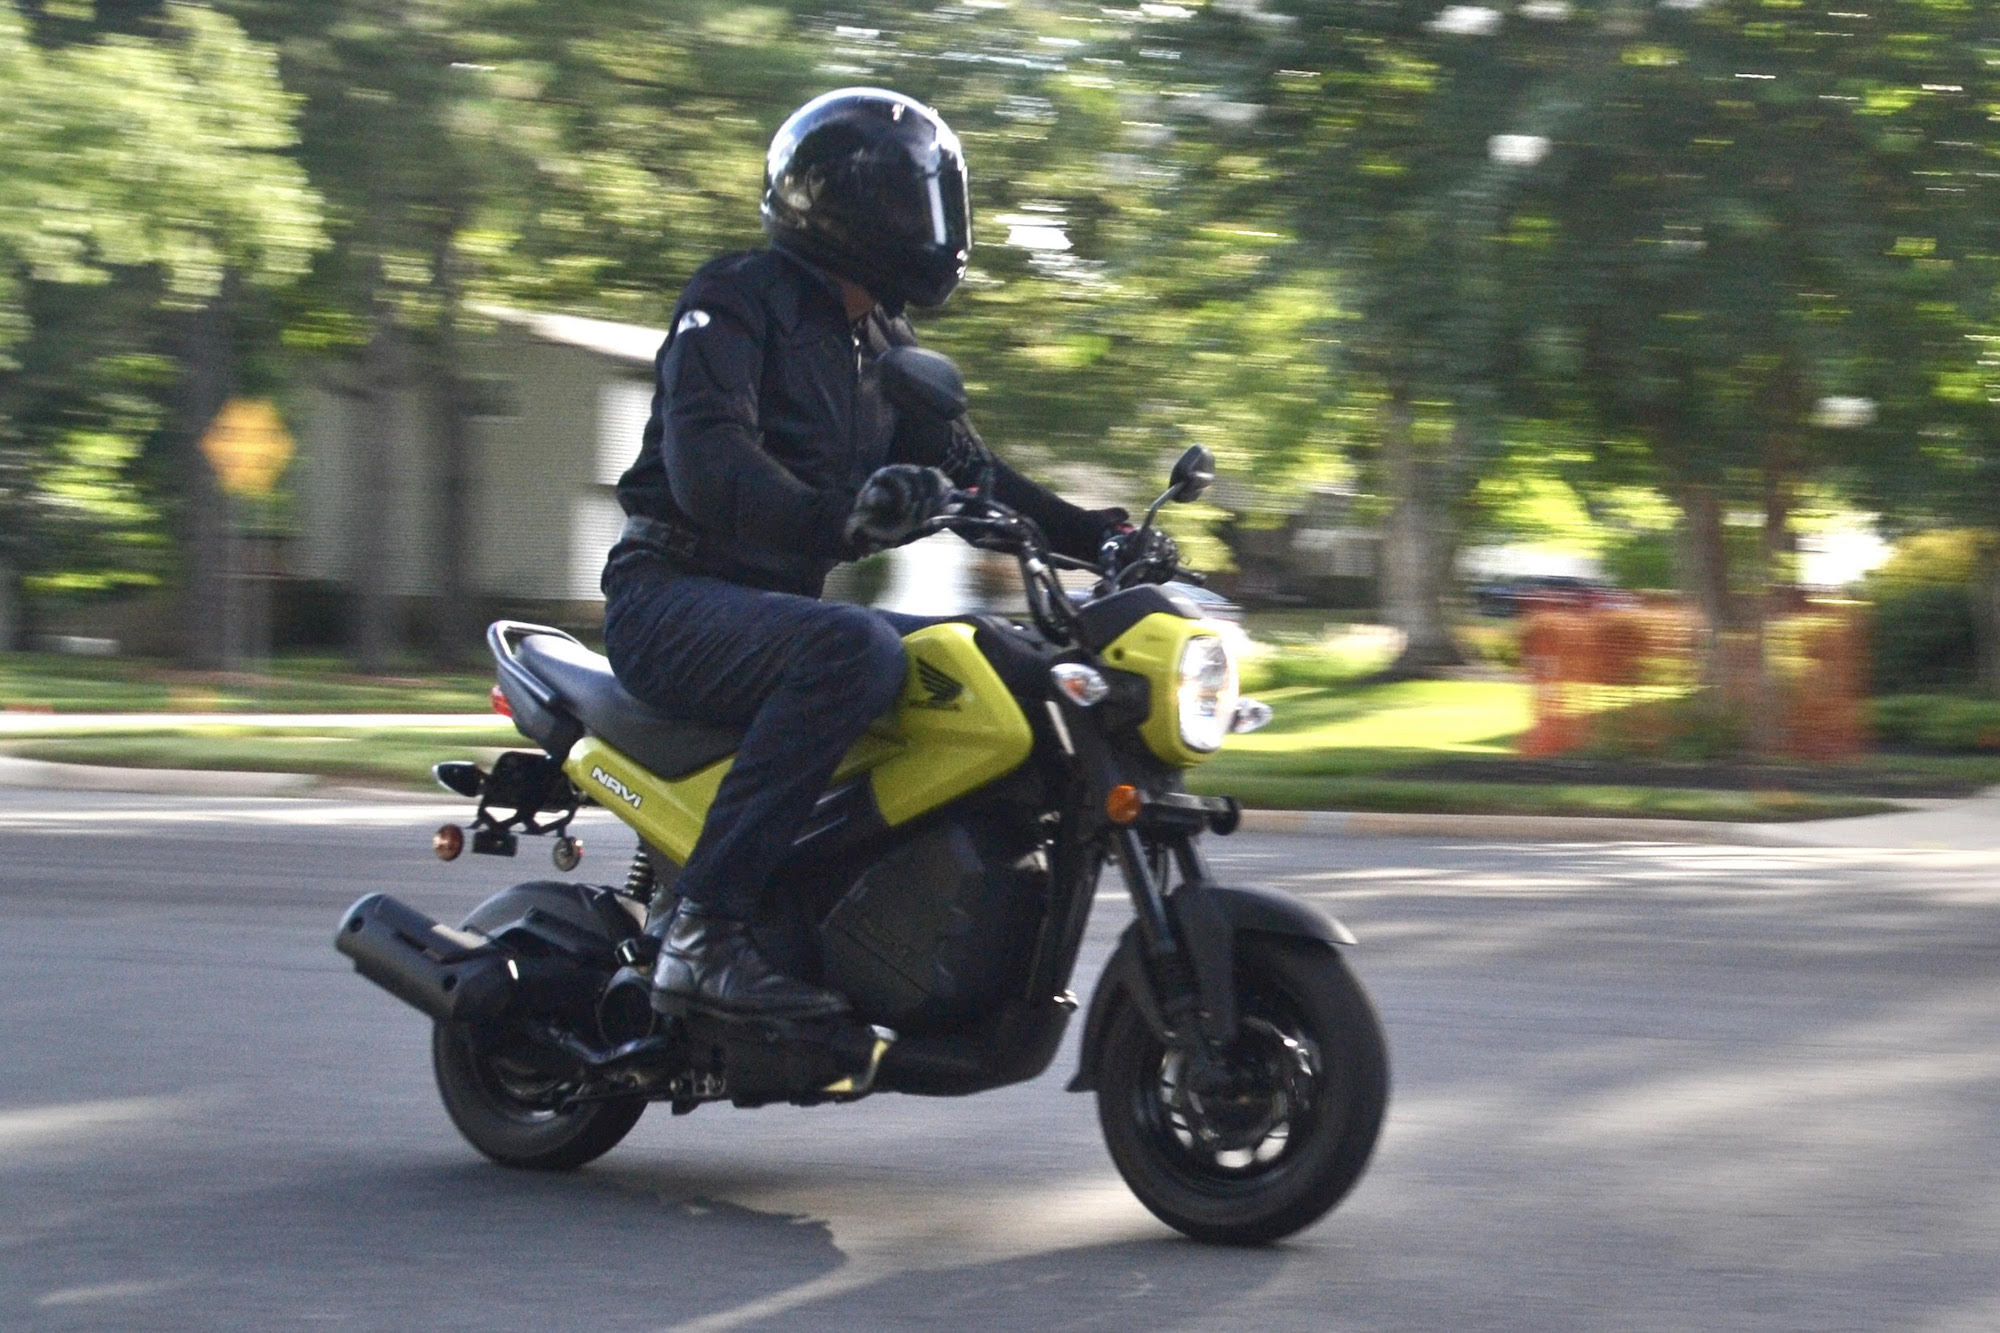 Honda's Navi motorcycle is a toy-like toy.